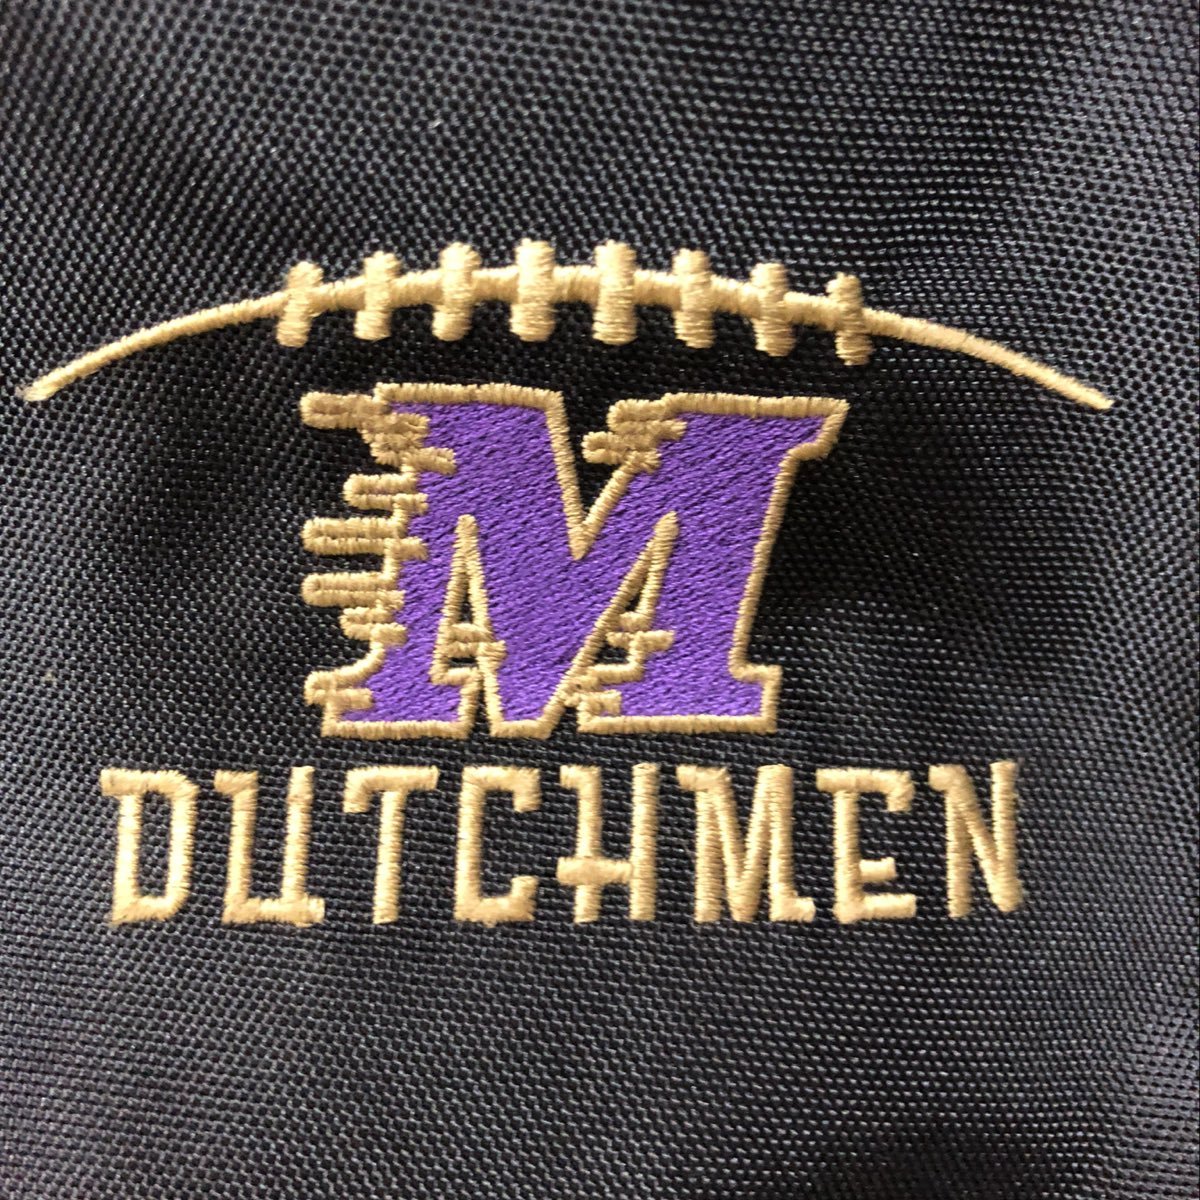 The official home of Dutchmen Football.